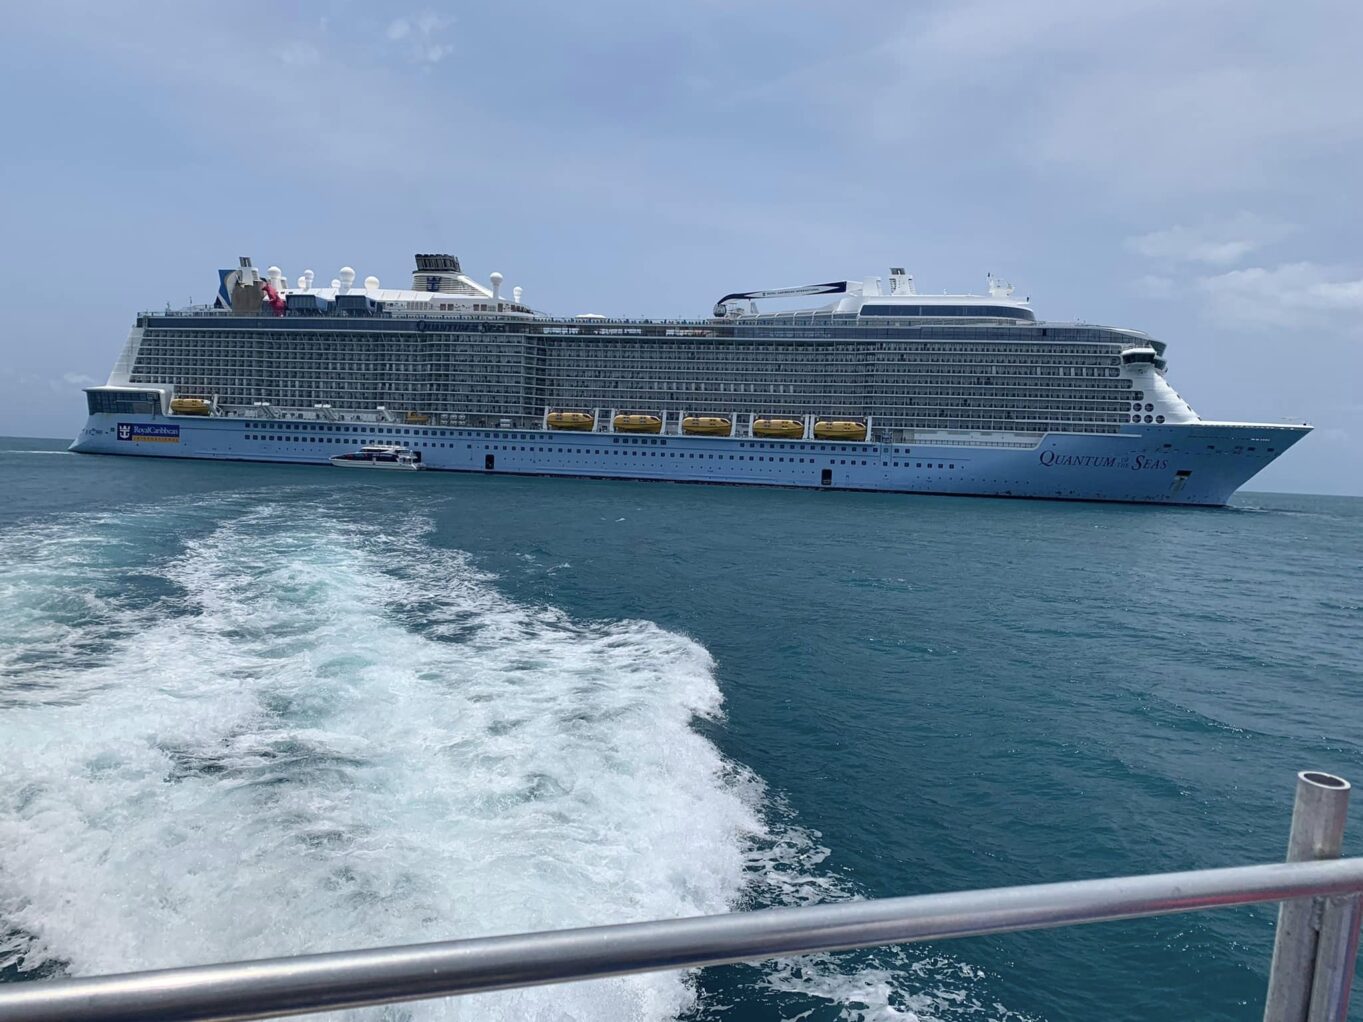 Tenders take passenegers from Quantum of the Seas to the port of Cairns. Facebook